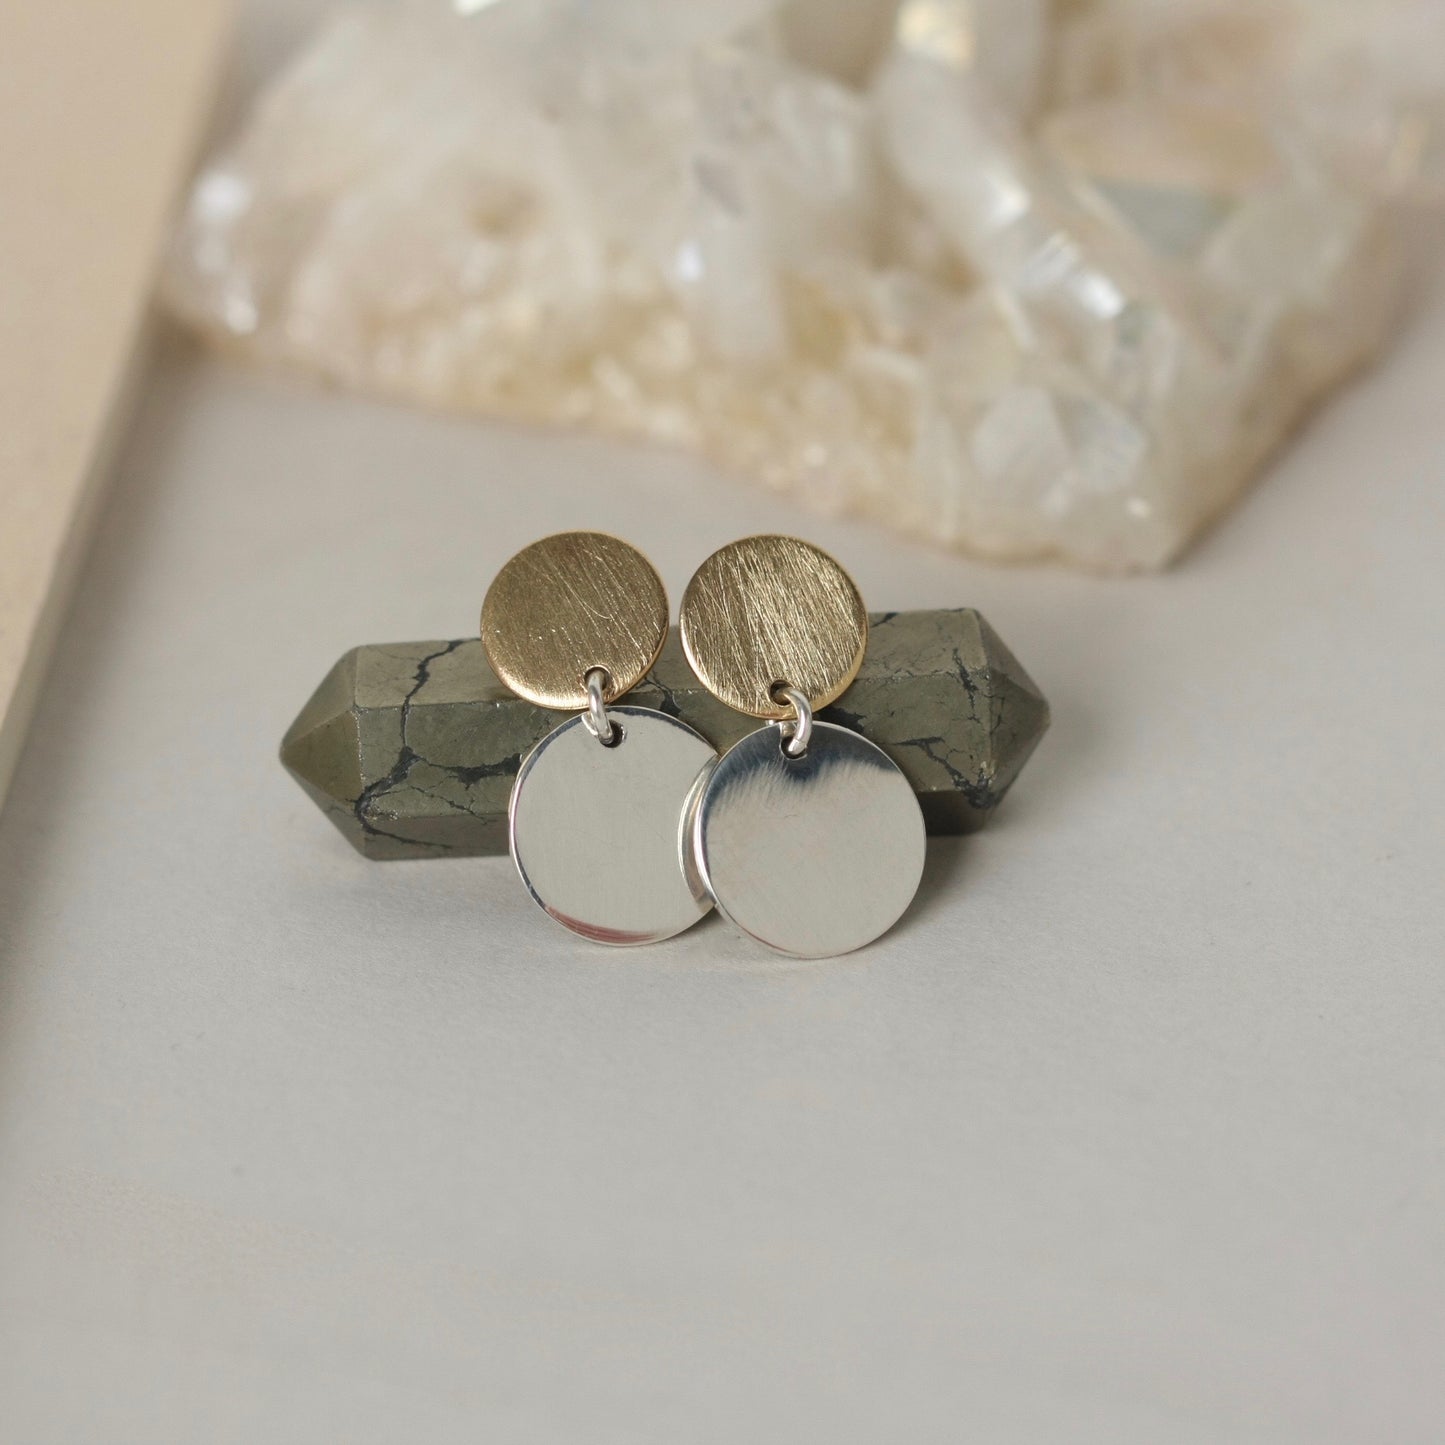 Mixed Metal Sterling Silver and Brass Circle Stud Earrings